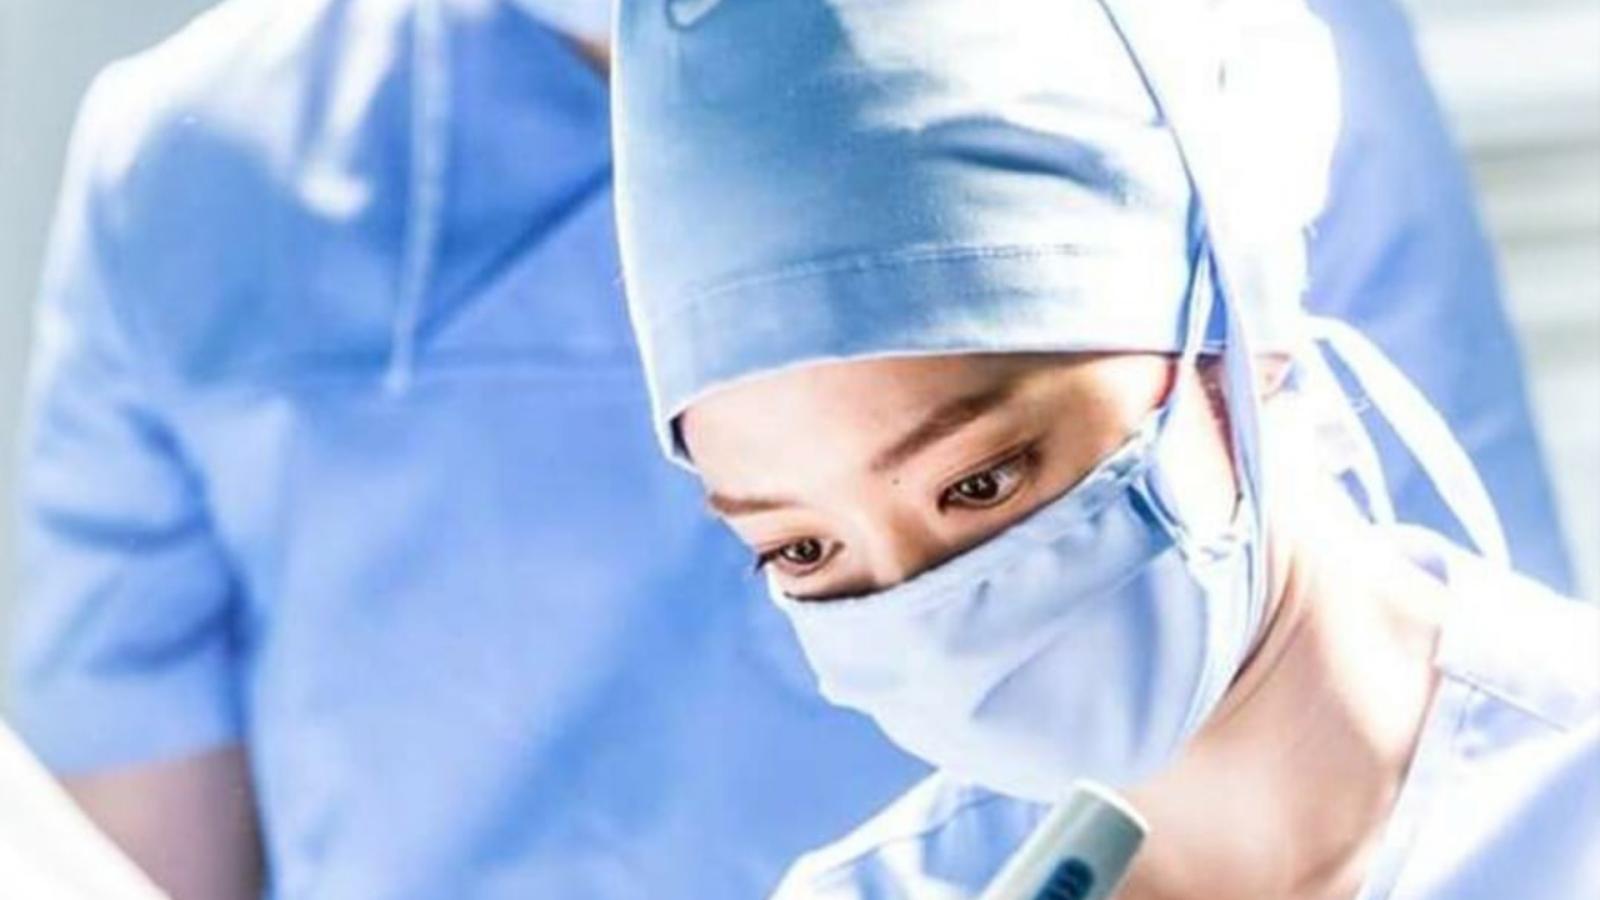 Forget Grey's Anatomy, These 10 Medical K-Dramas Are Better - image 7